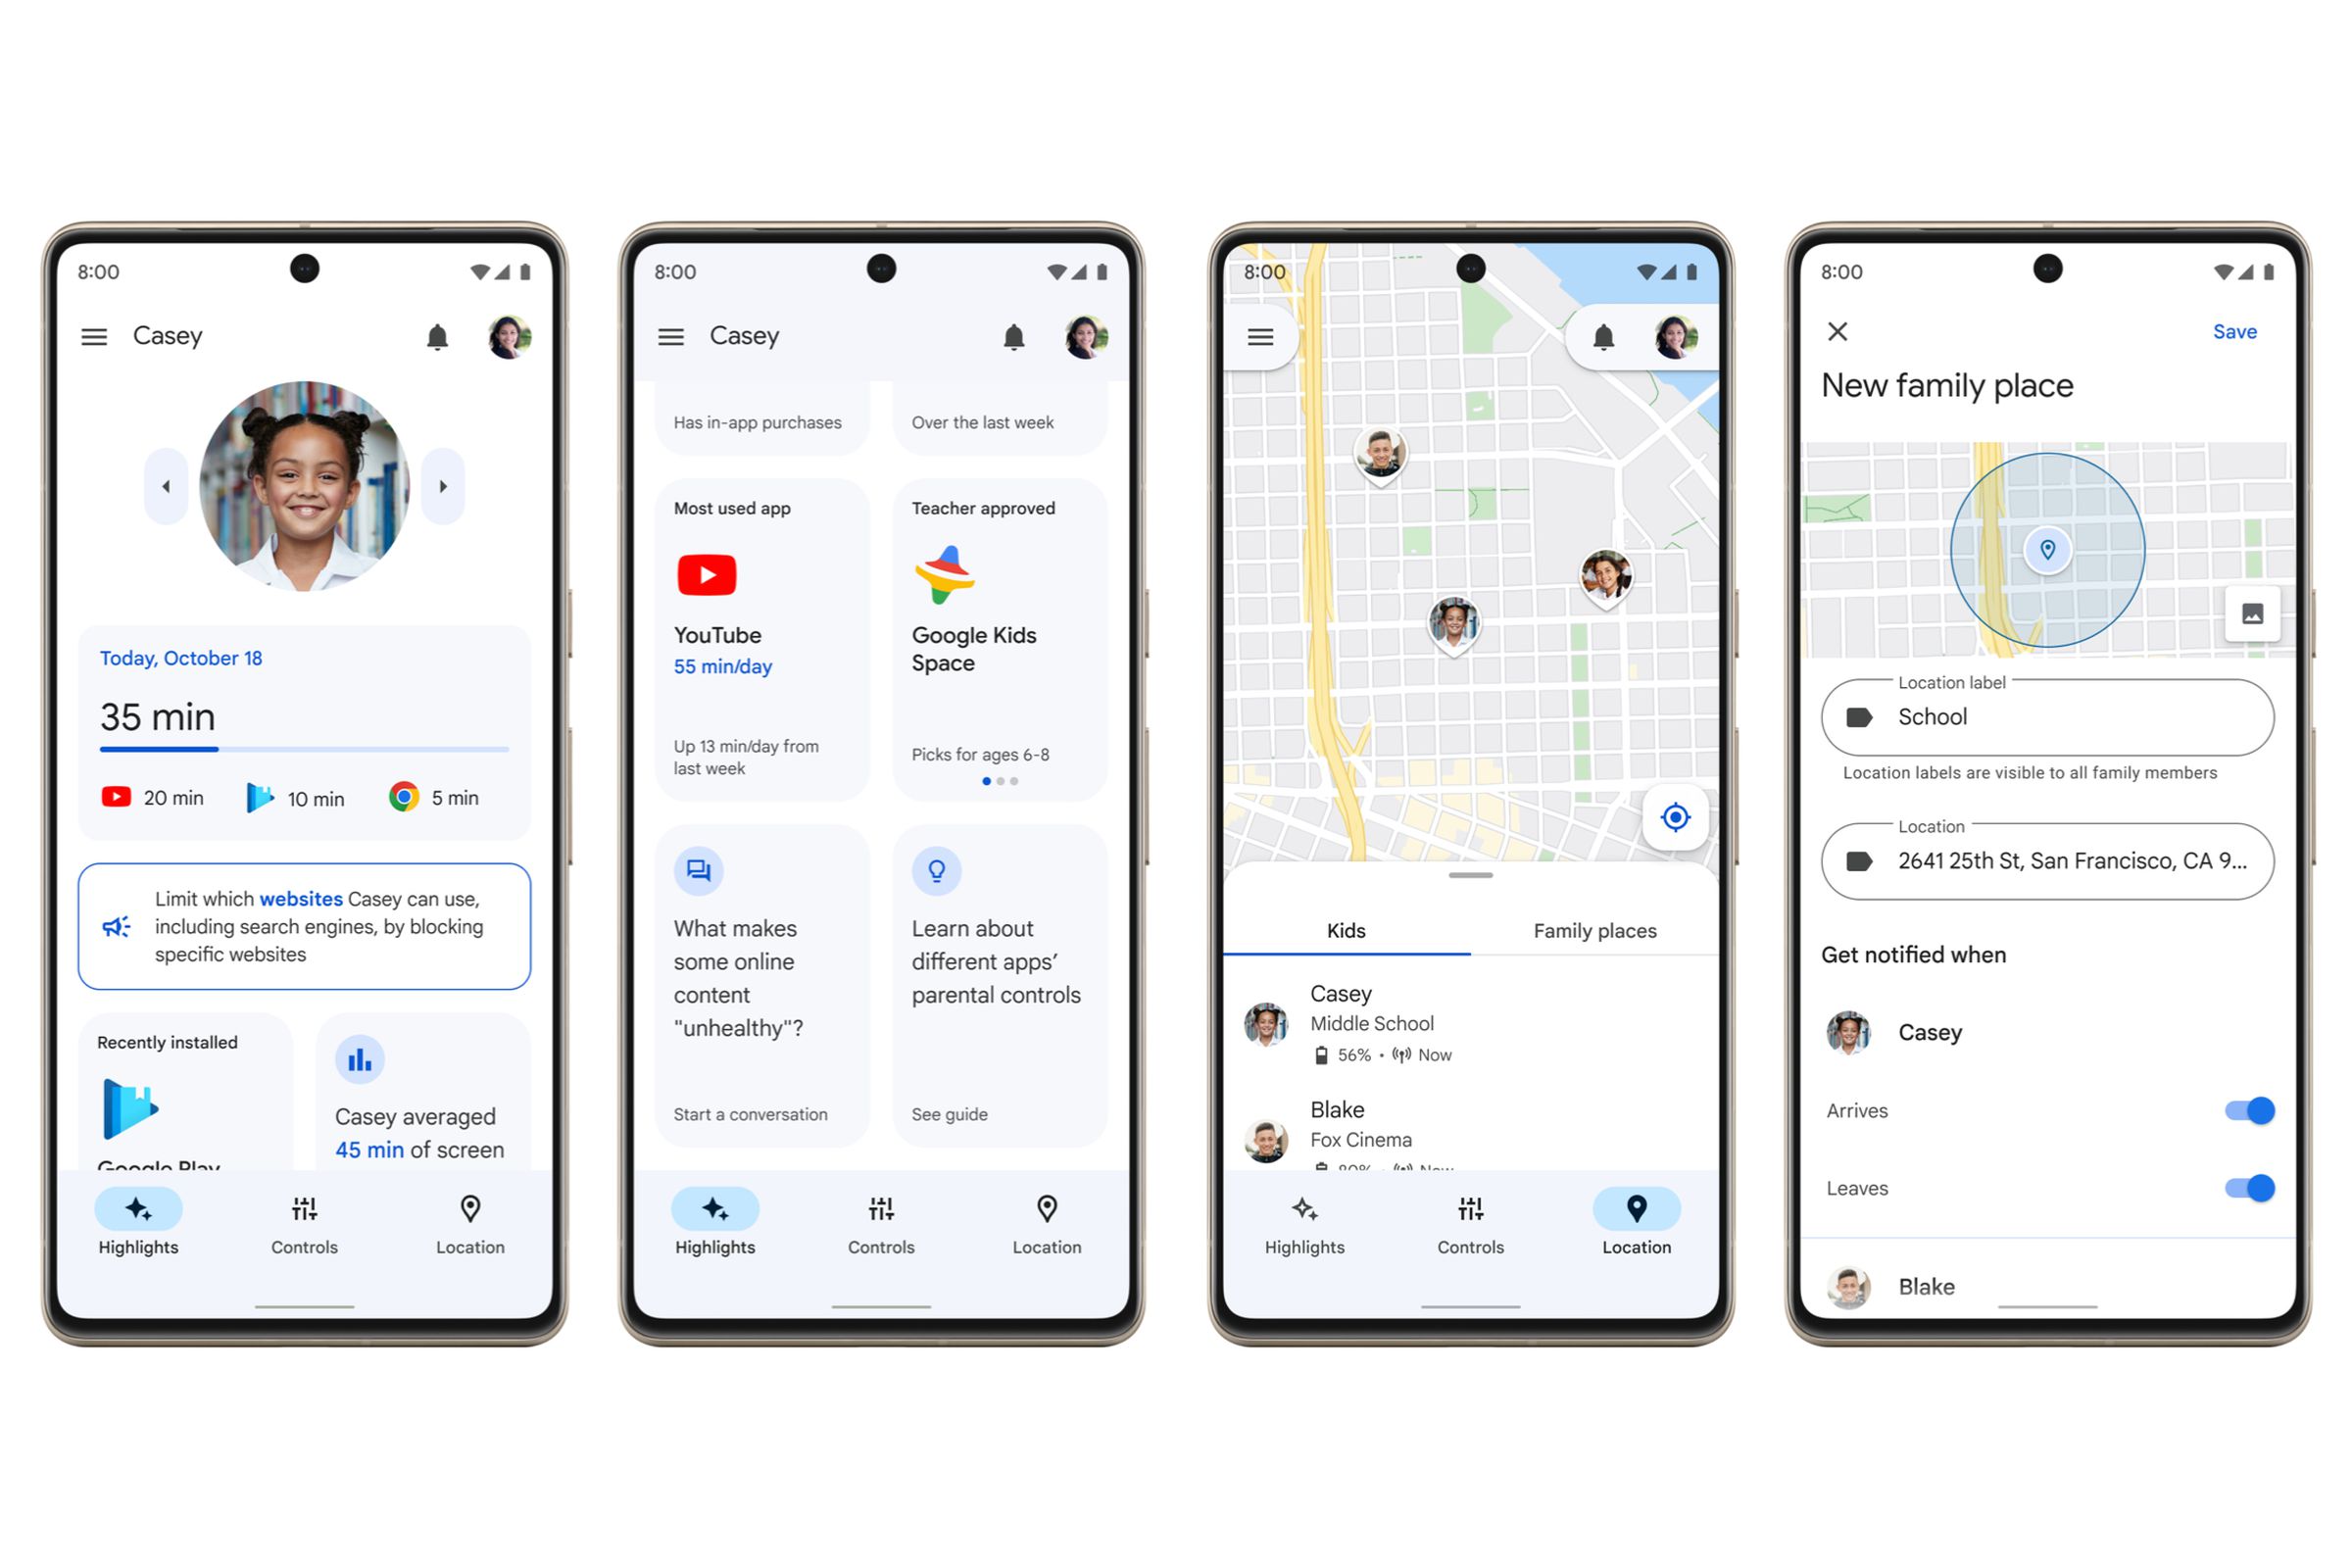 Highlights gives you a quick overview of what your kid is up to, and Location can now alert you when your kid leaves or arrives at certain locations.